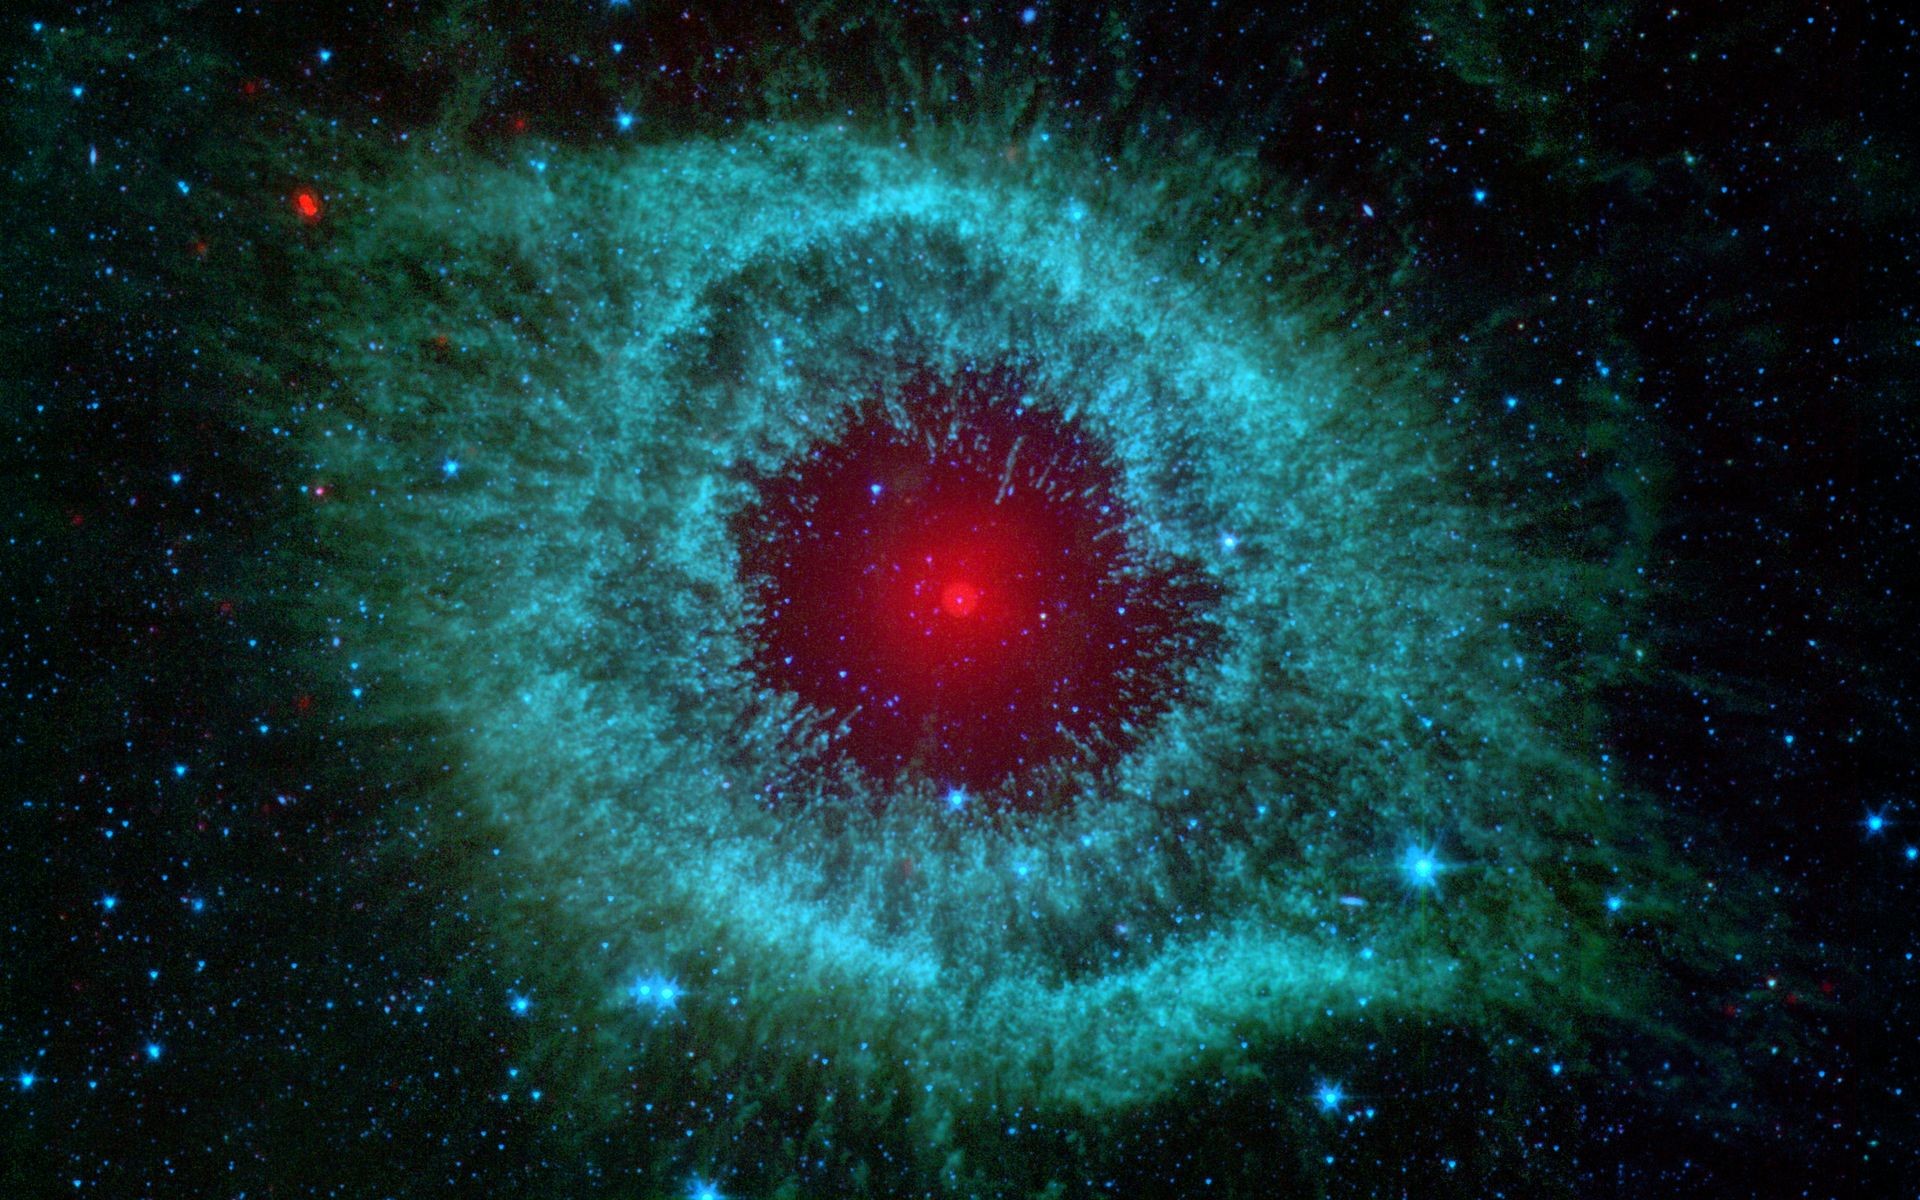 This infrared image from NASAs Spitzer Space Telescope shows the Helix nebula, a cosmic starlet